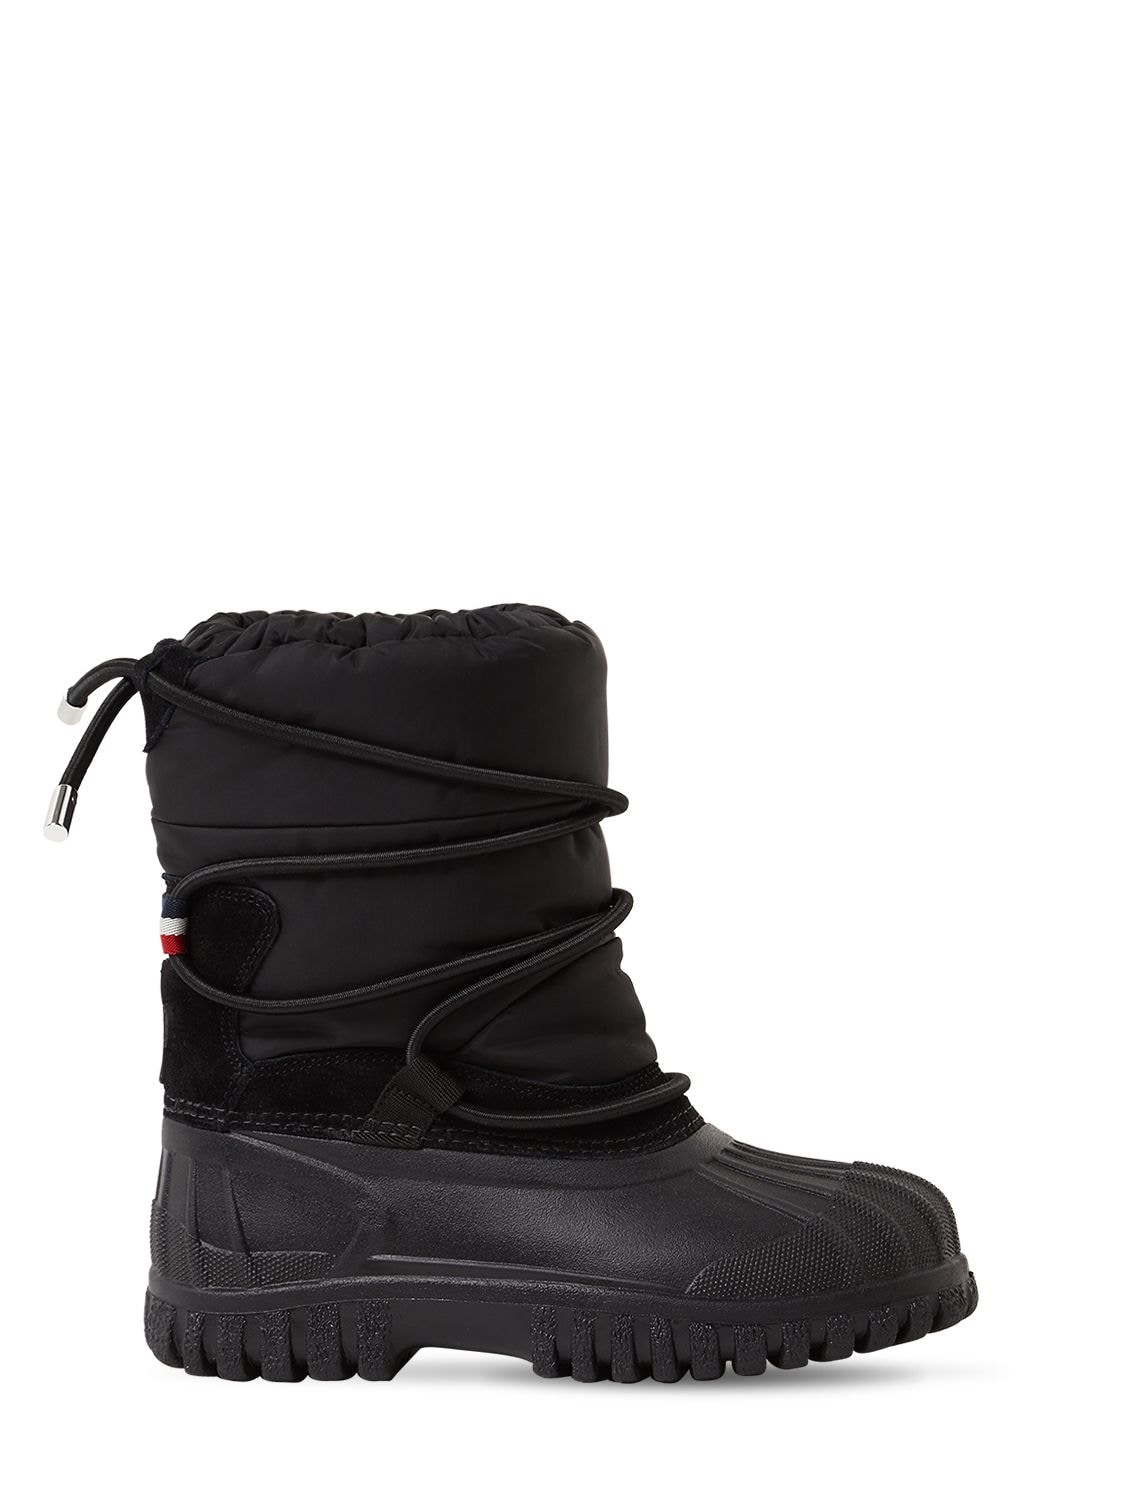 Kids' MONCLER Boots On Sale, Up To 70% Off | ModeSens